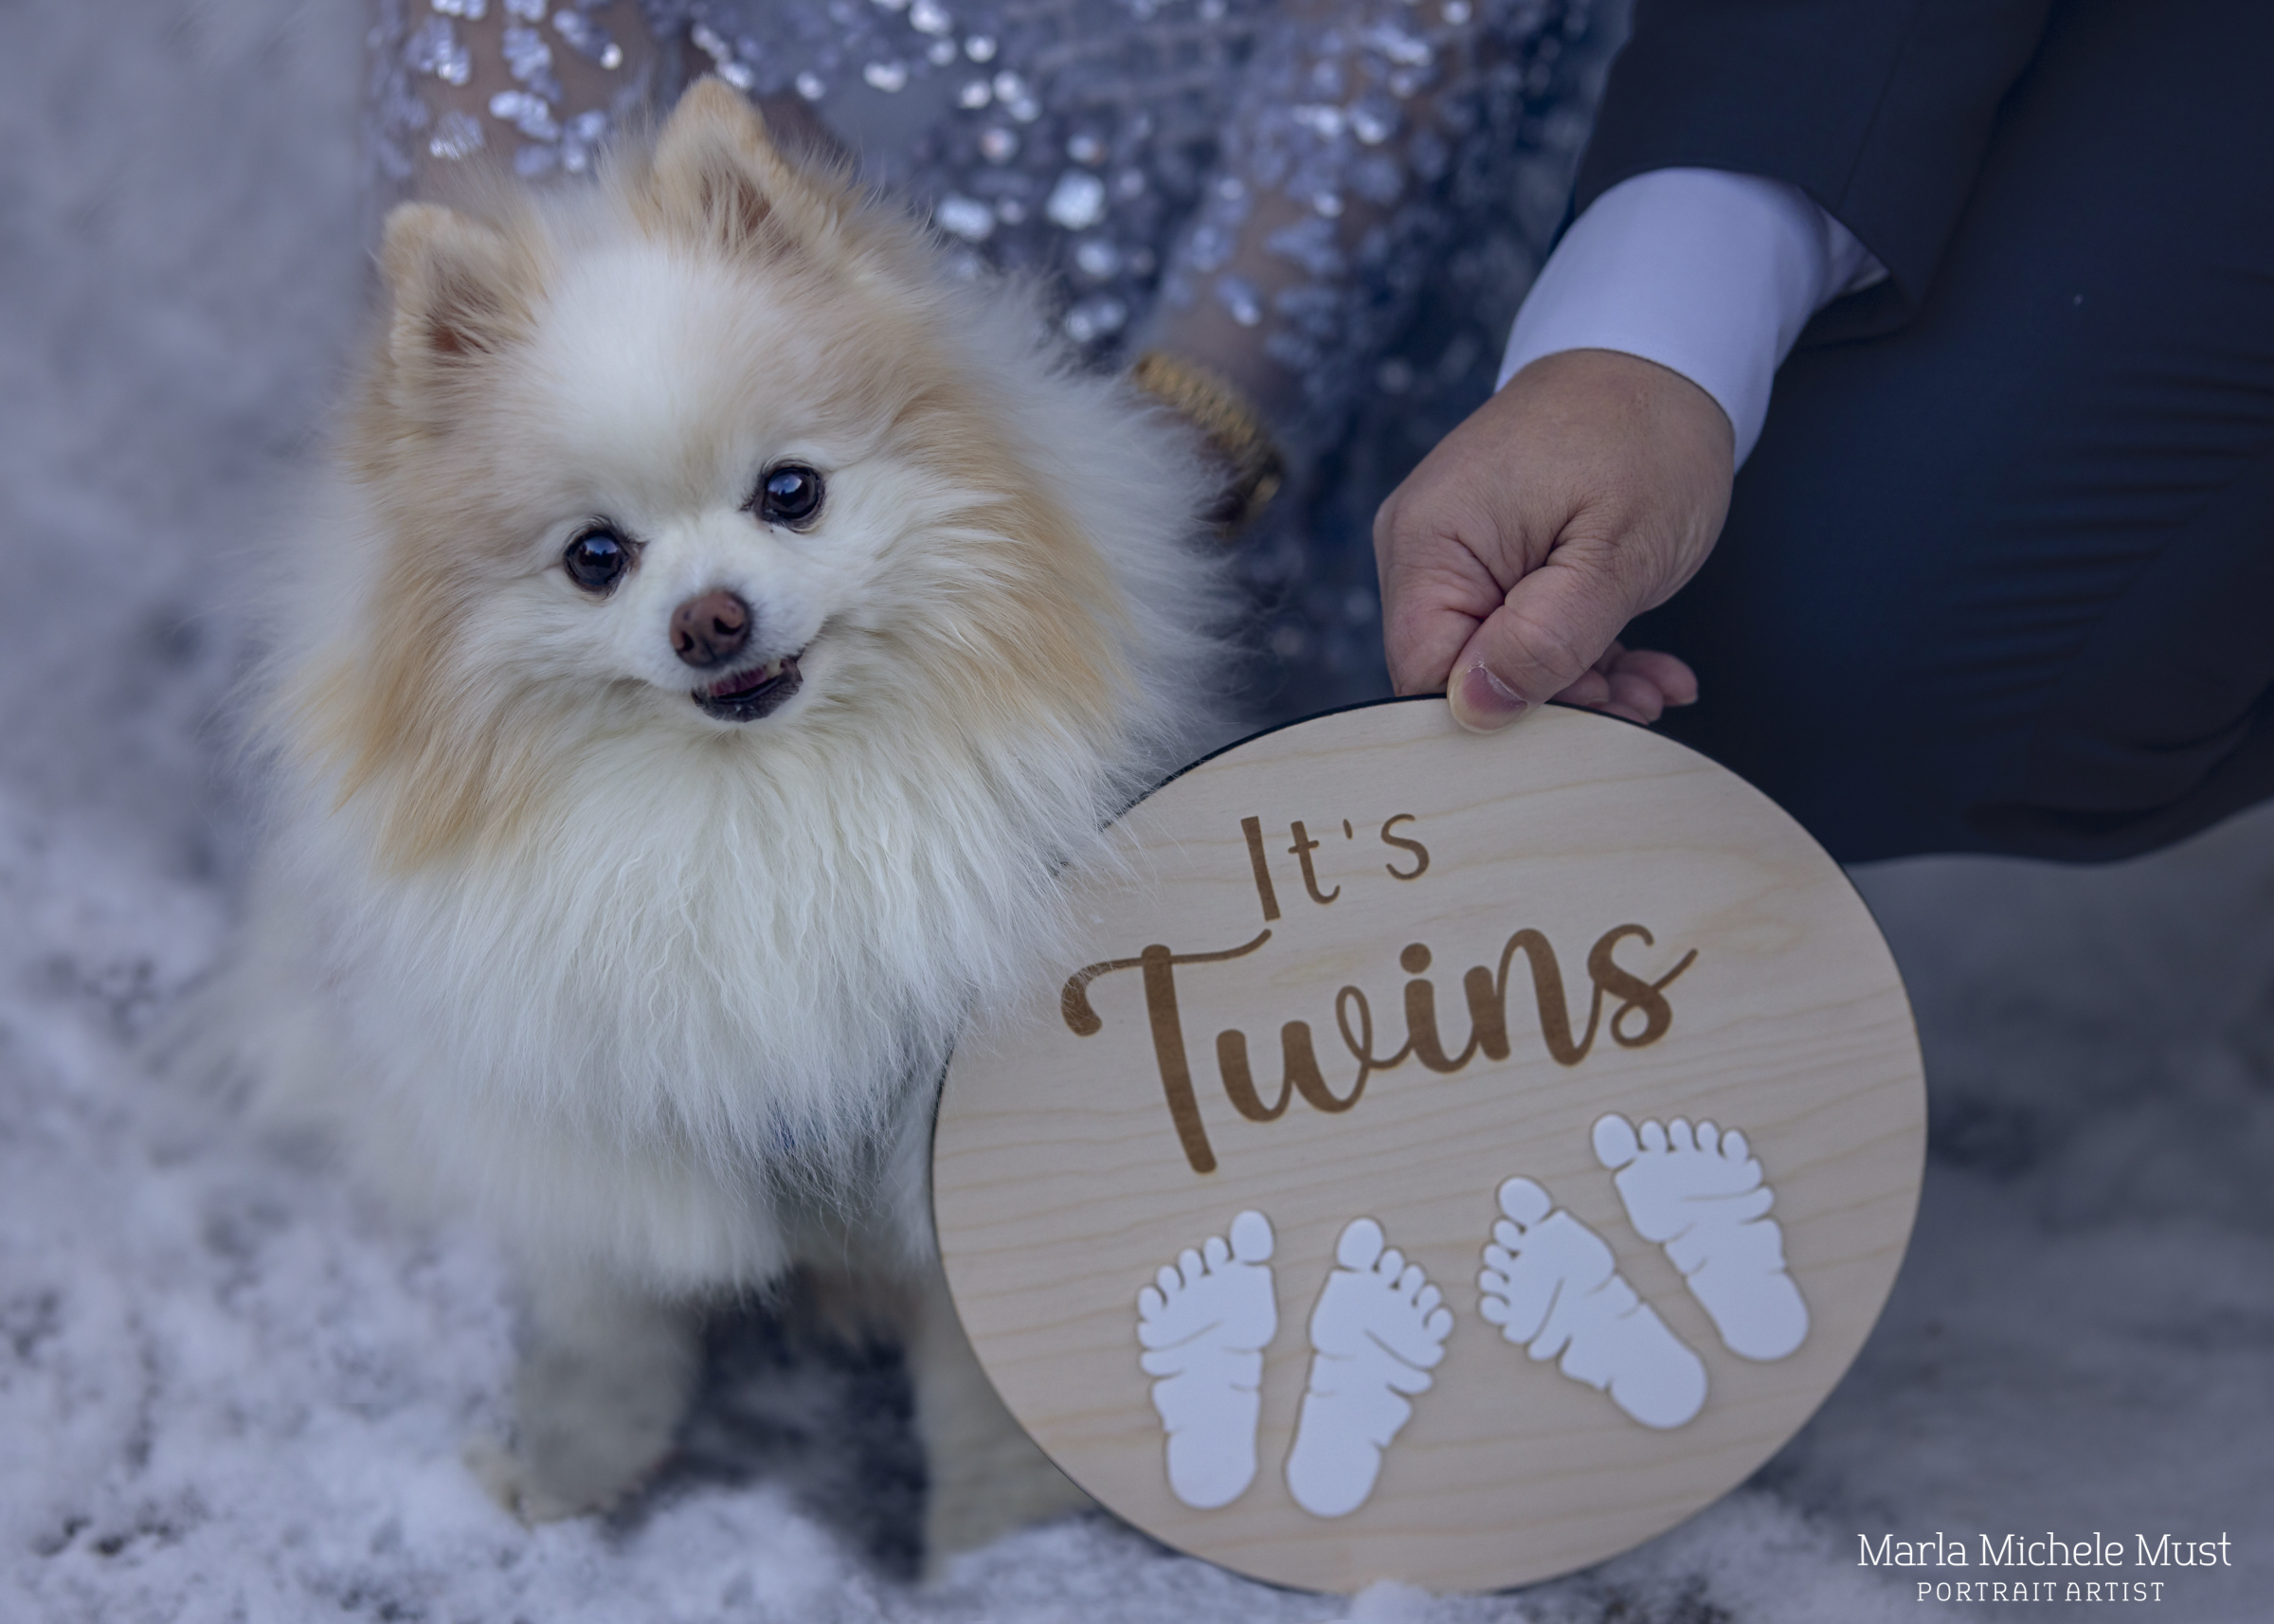 A small fluffy dog looks at the camera as a male hand holding a small, round, wooden sign displaying the words "It's Twins!" with two pairs baby footprints imprinted is held within the shot; a moment captured by a Detroit maternity photographer.